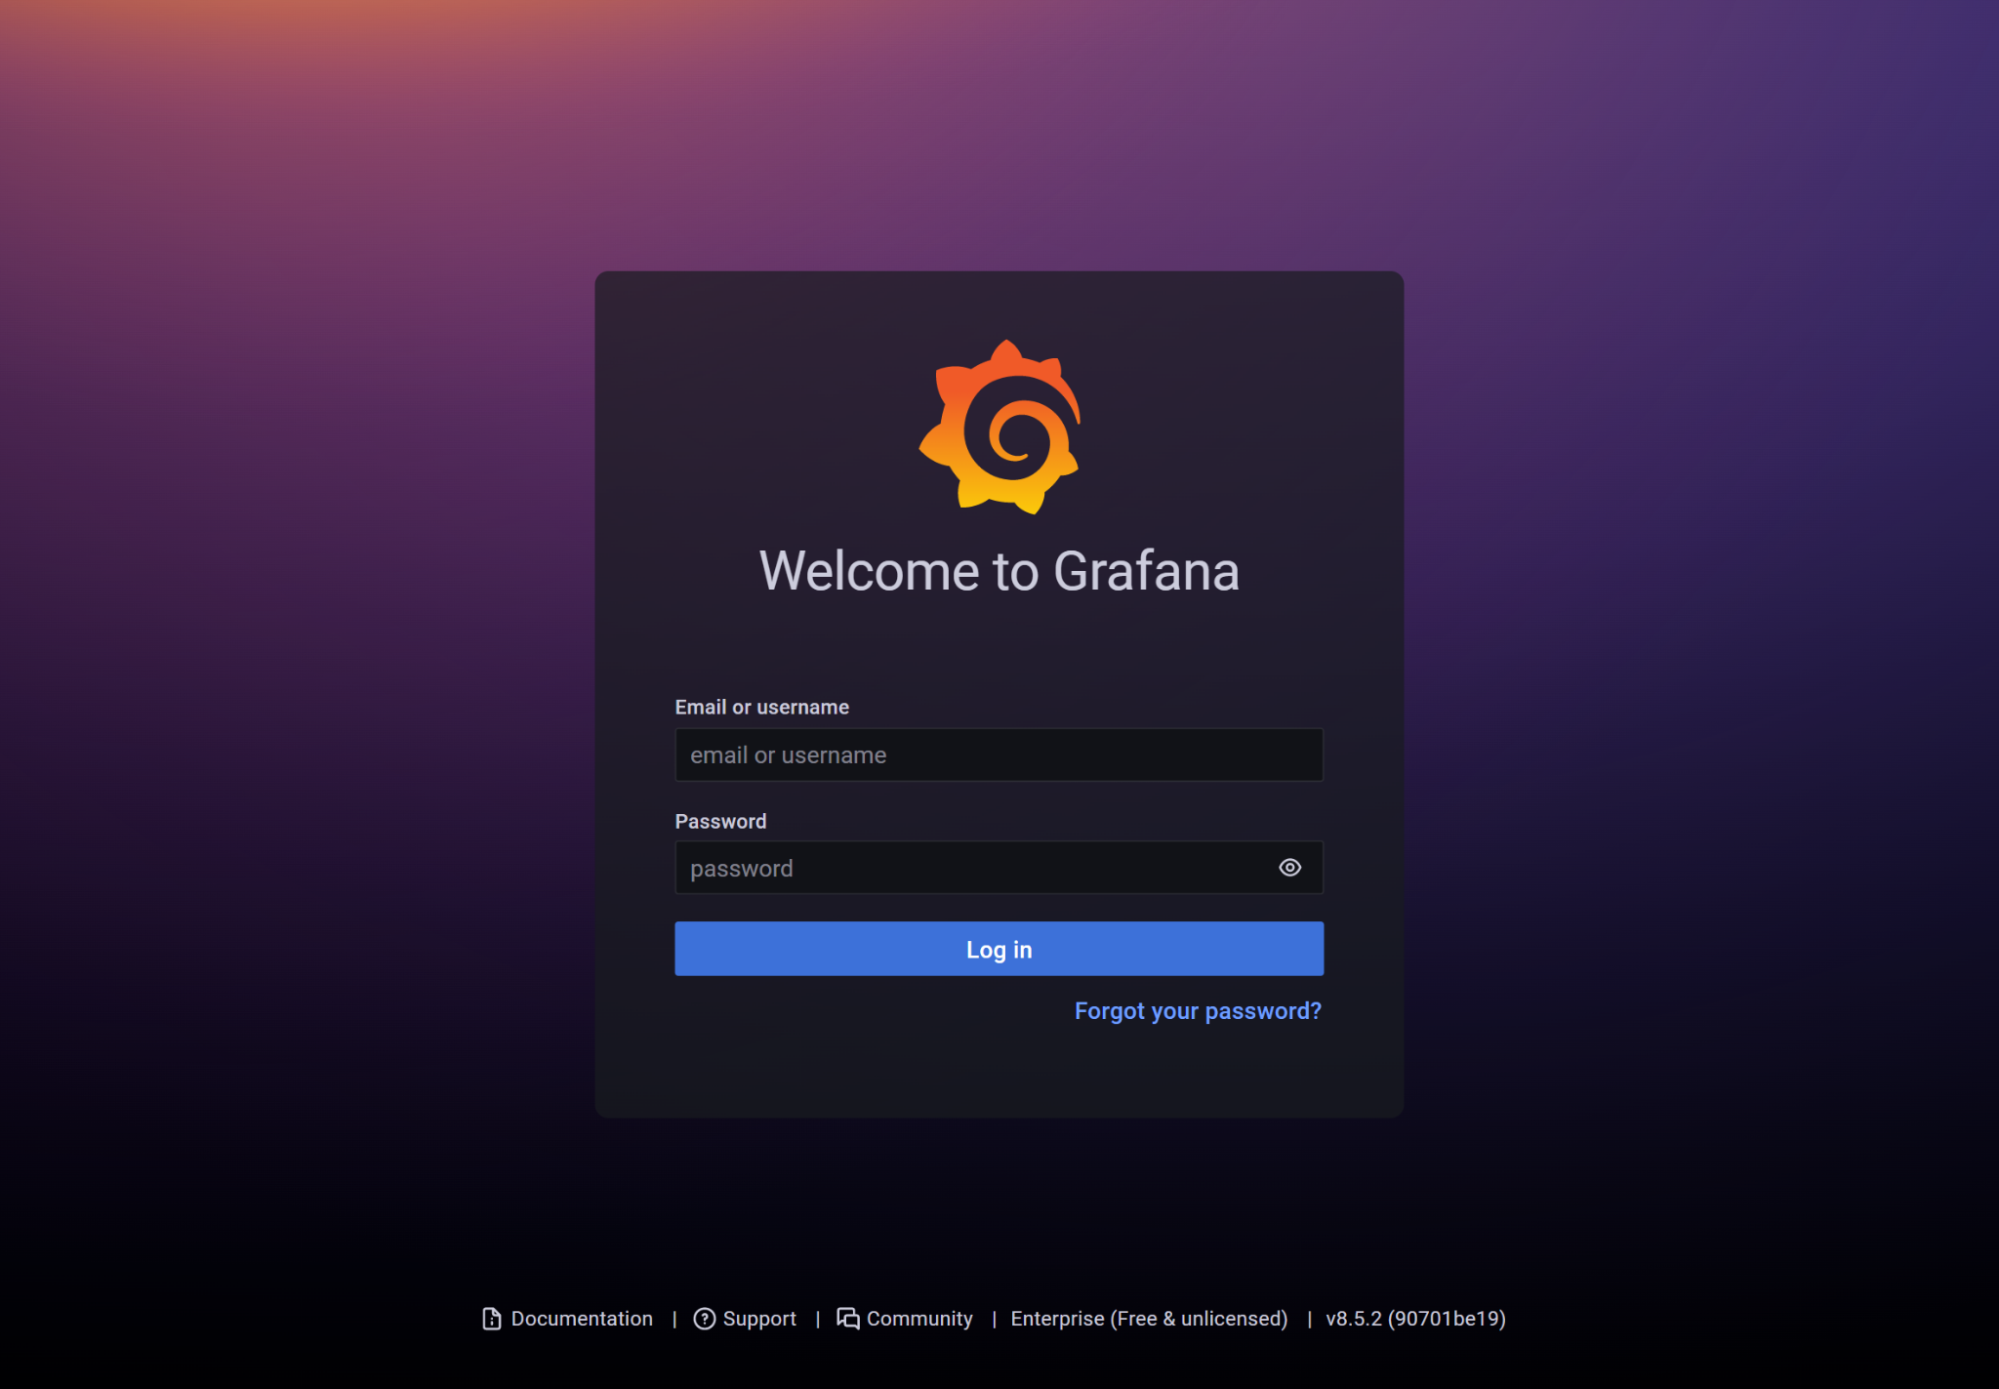 The Grafana login page showing no username or password